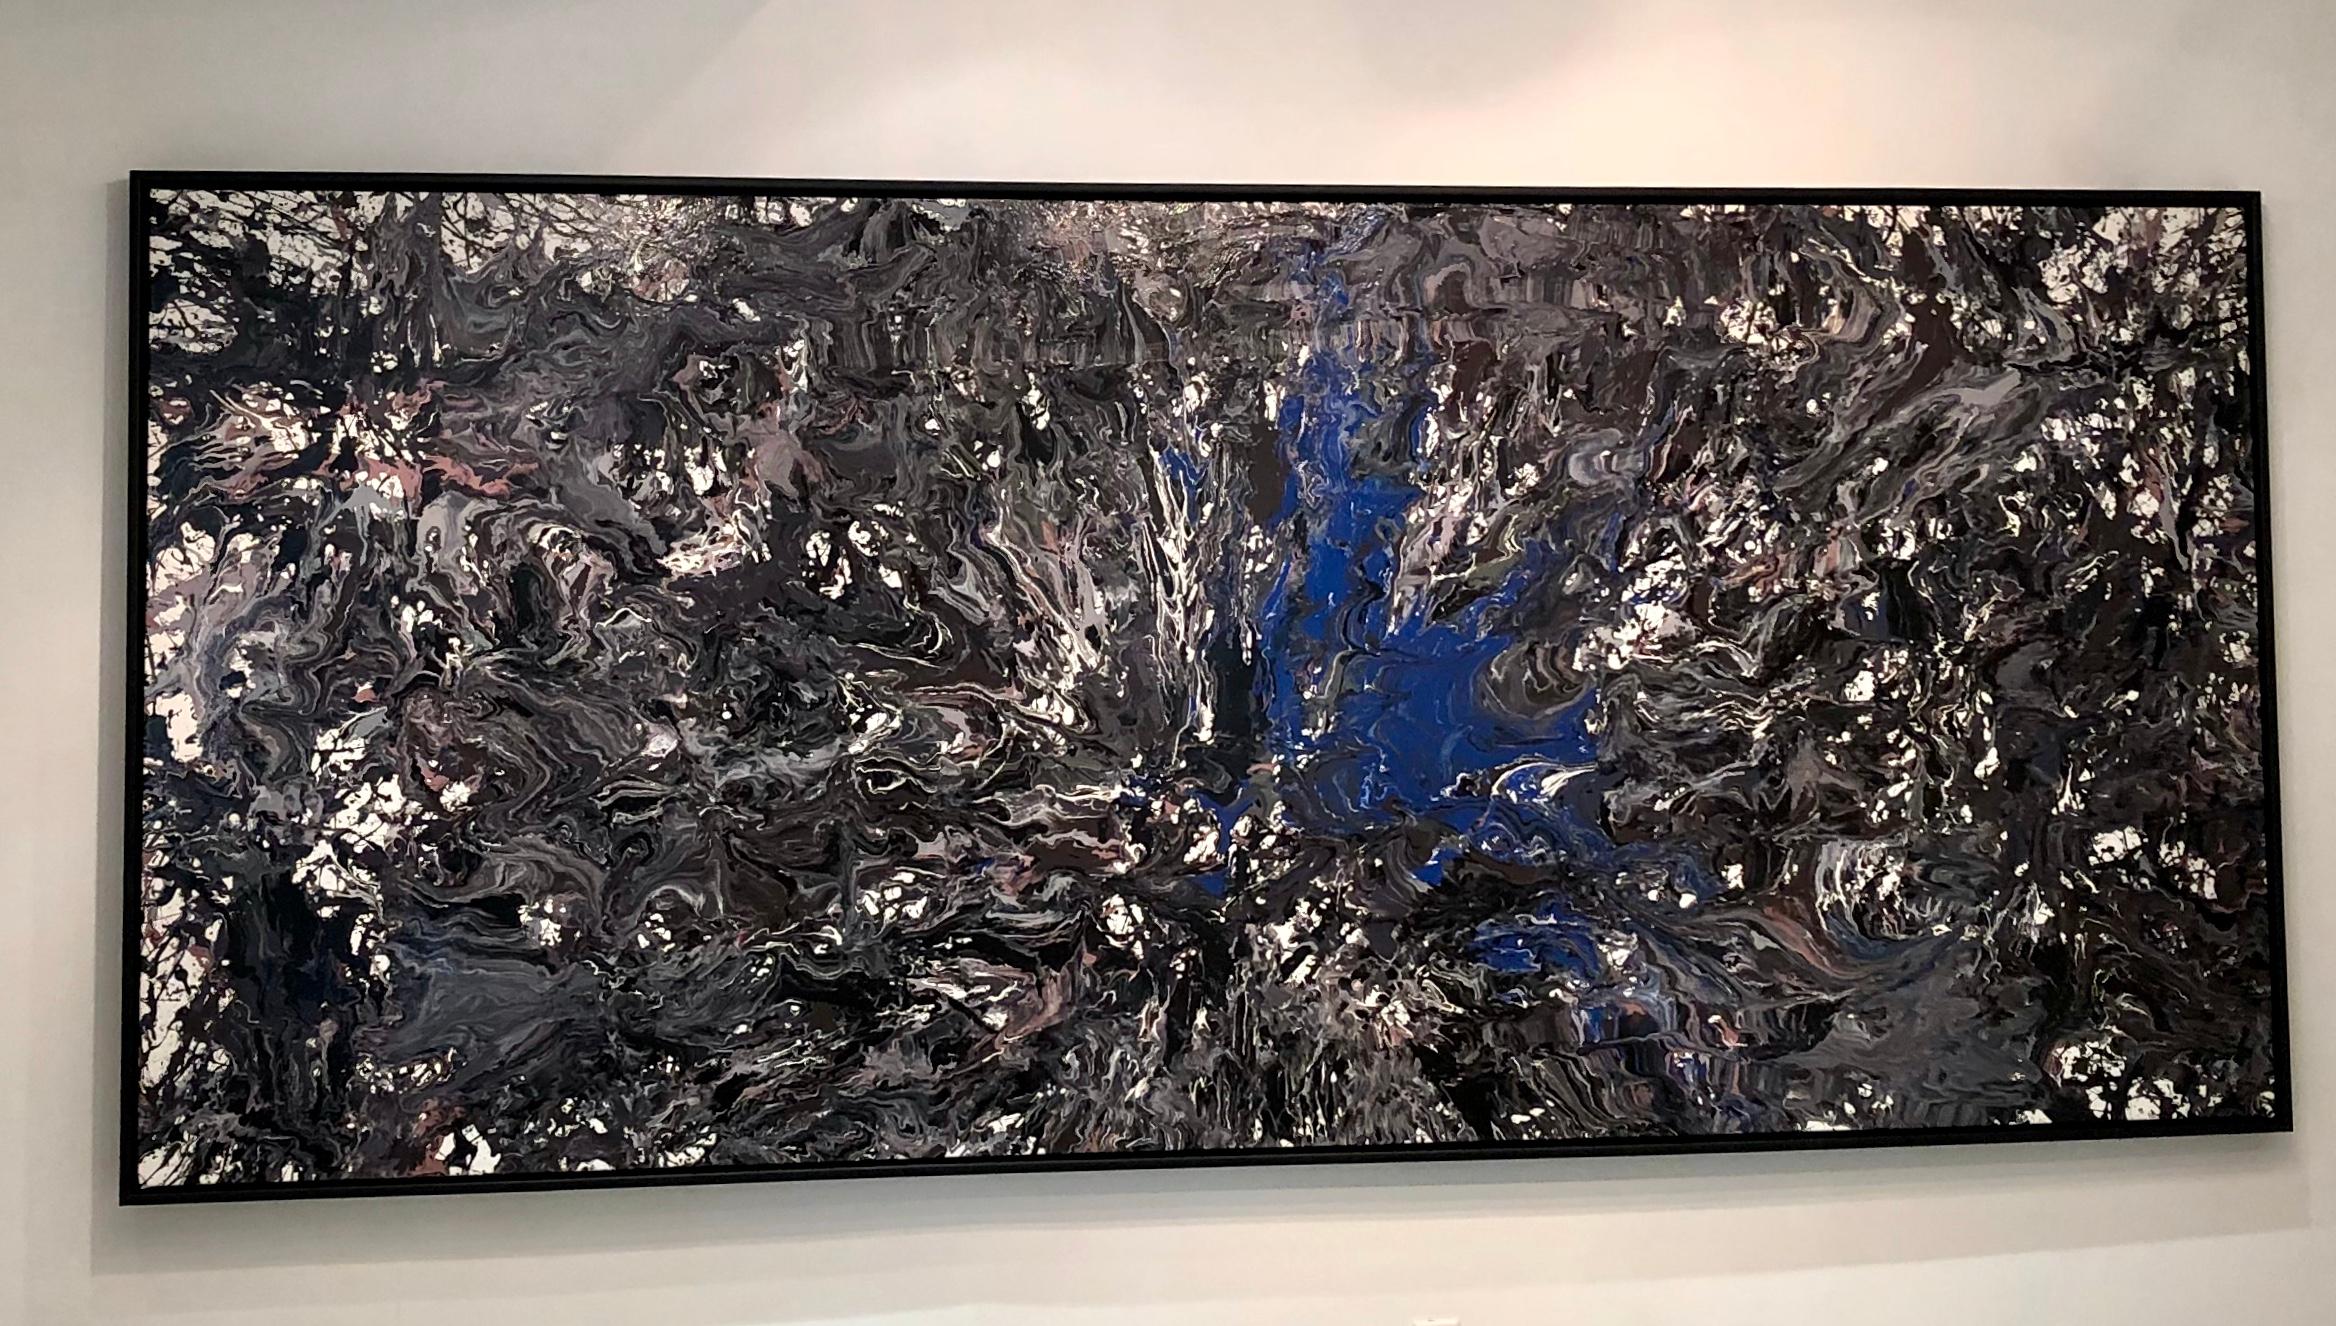 Steve Cohen Abstract Painting - Origin II: The Cooling (The Calm Before Life's Spark)    (Floats in Black Frame)